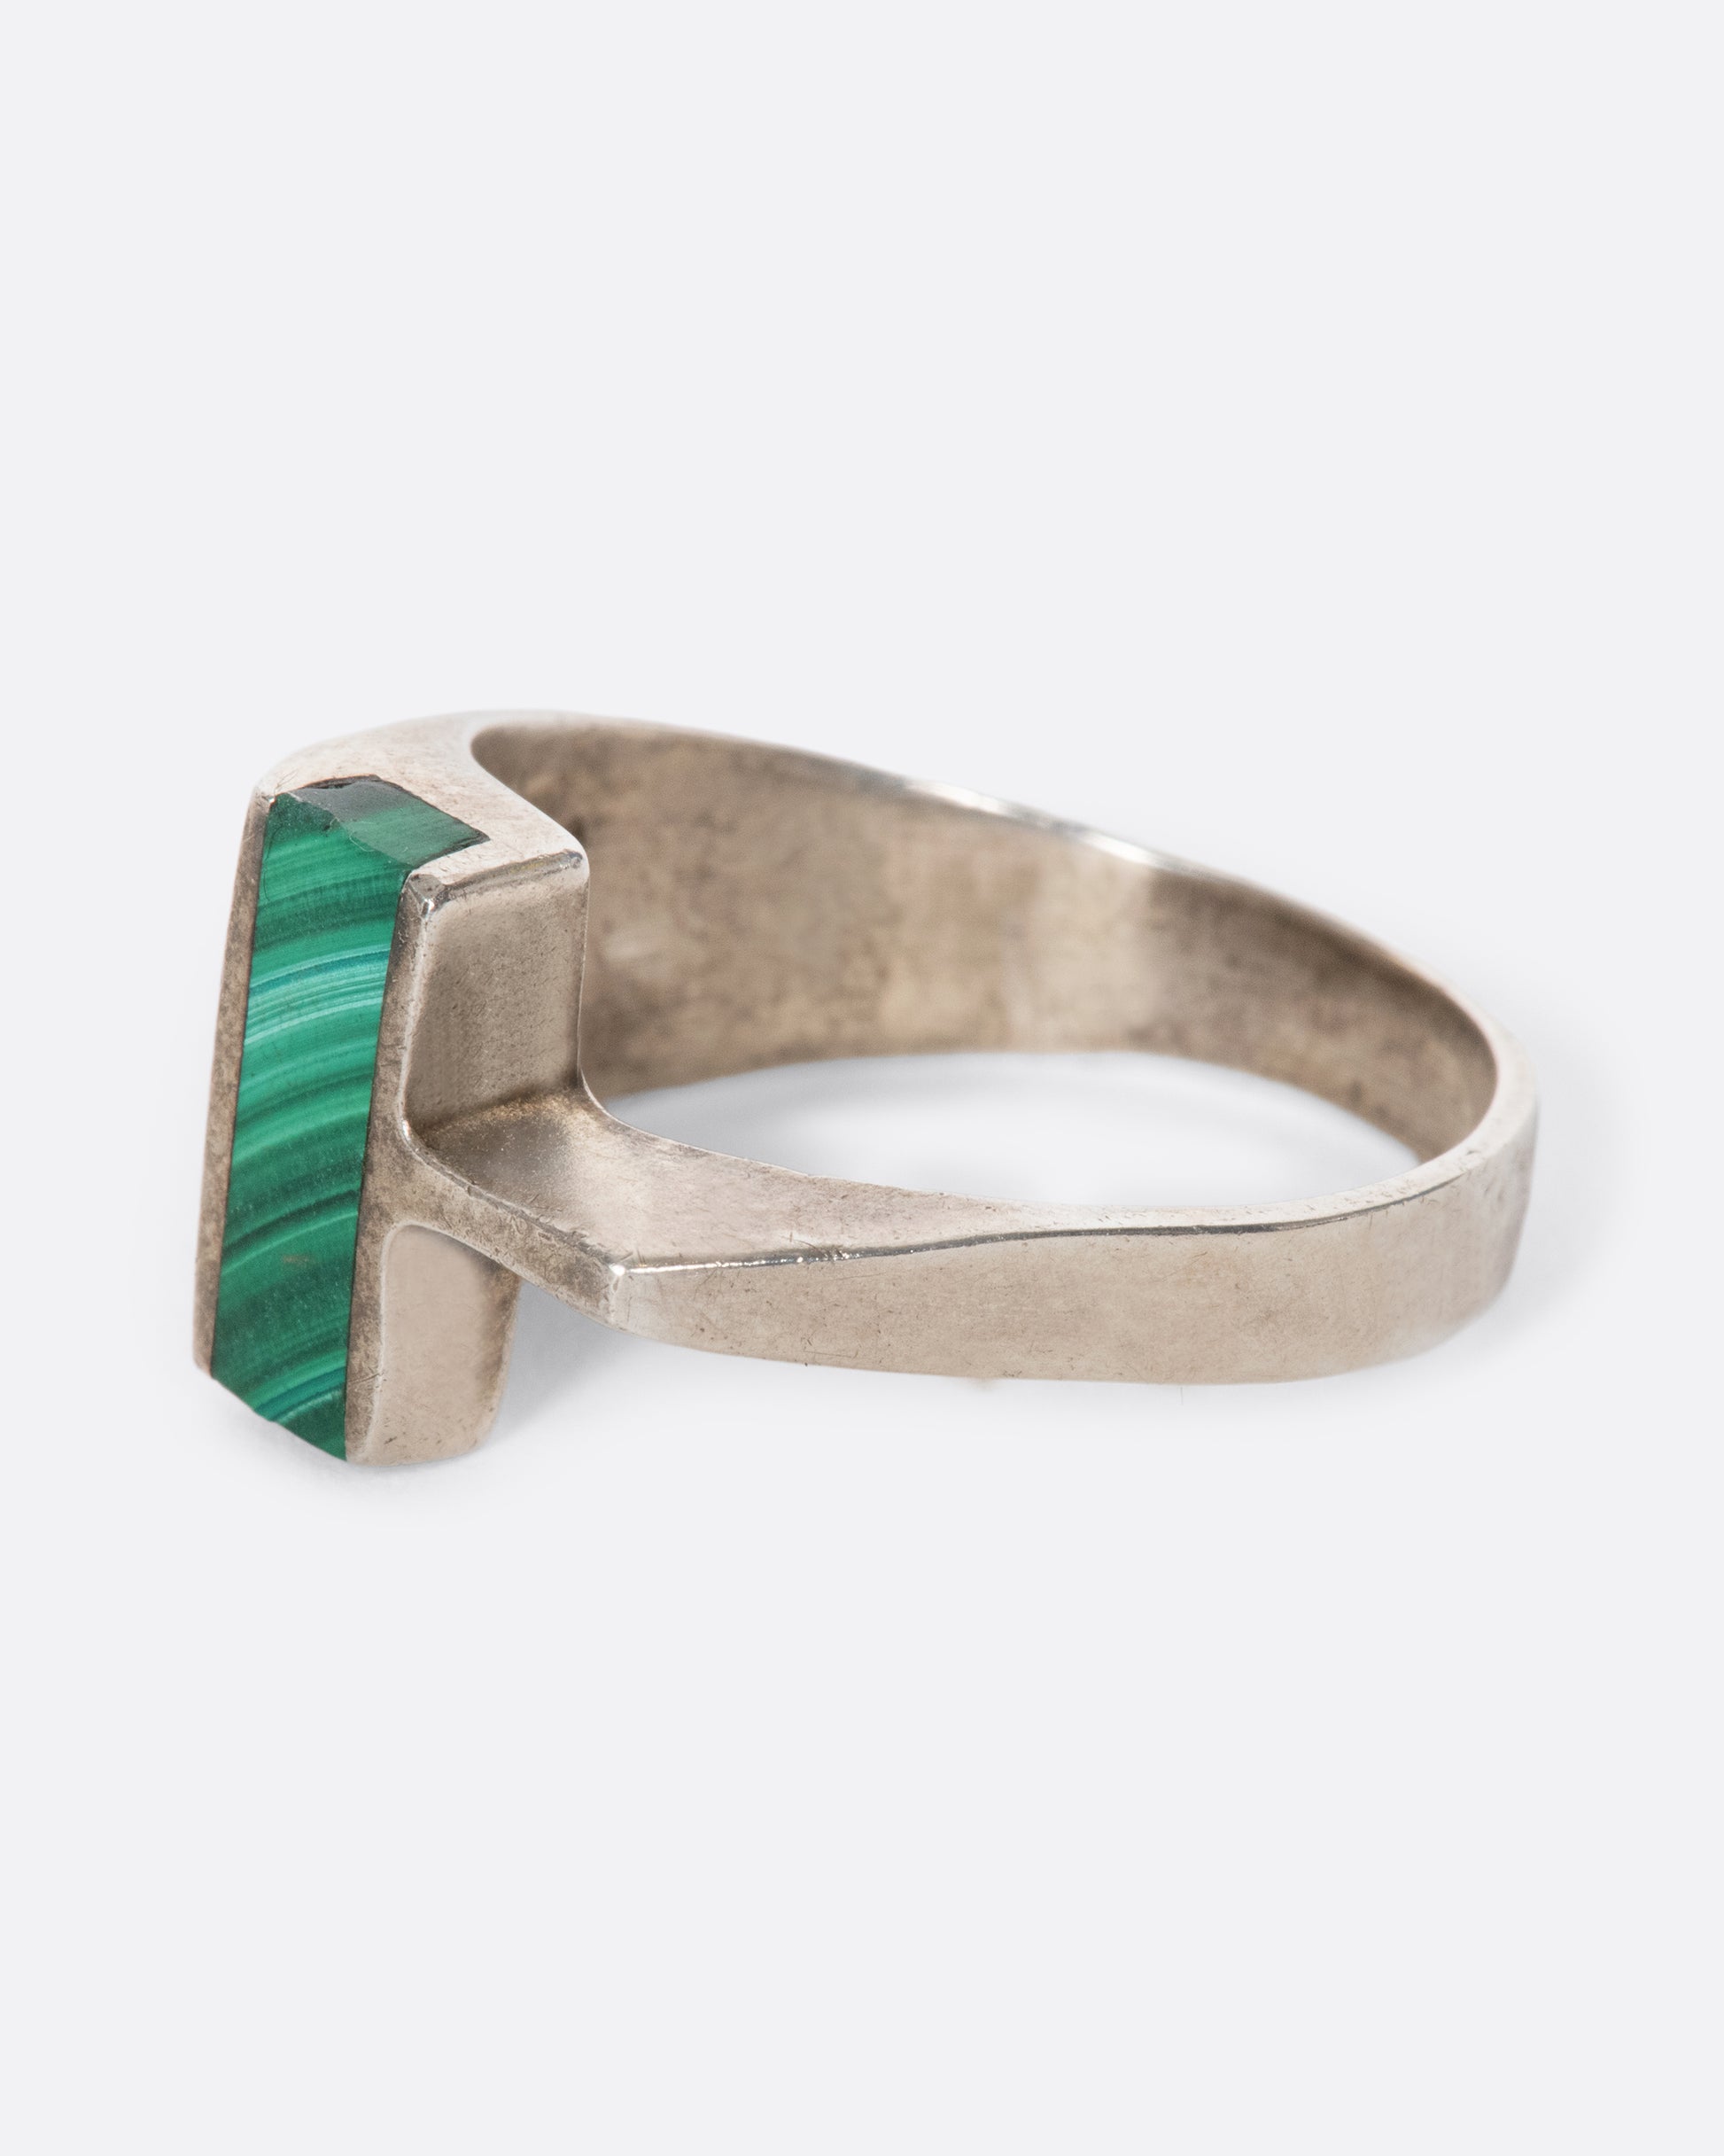 A vintage sterling silver T-shaped ring with a slice of malachite sitting high above your finger. The interesting asymmetry makes a statement without sacrificing comfort.